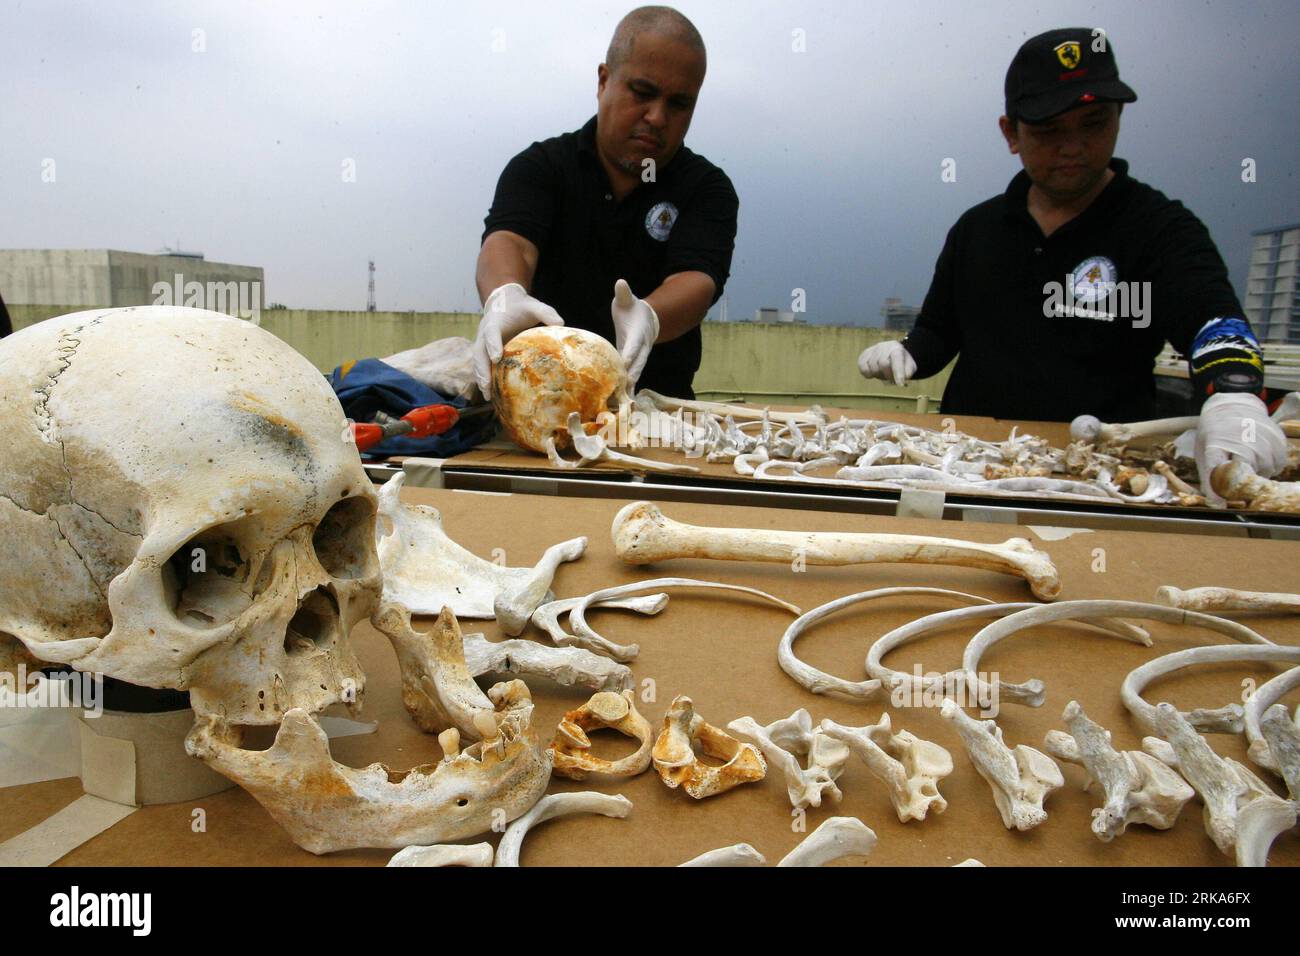 Bildnummer: 54276893  Datum: 05.08.2010  Copyright: imago/Xinhua (100805) -- QUEZON CITY, Aug. 5, 2010 (Xinhua) -- Forensic experts study the skeletal remains of the victims of the capsized M/V Princess of the Stars at the Public Affairs Office in Quezon City, the Philippines, August 5, 2010. , the Philippine ferry M/V Princess of the Stars sank off Romblon province in central Philippines after being hit by a ferocious typhoon. Only 42 passengers out of 747 aboard the ferry were rescued. Less than 100 remains had been retrieved since the sinking.(Xinhua/Rouelle Umali)(zl) THE PHILIPPINES-QUEZO Stock Photo